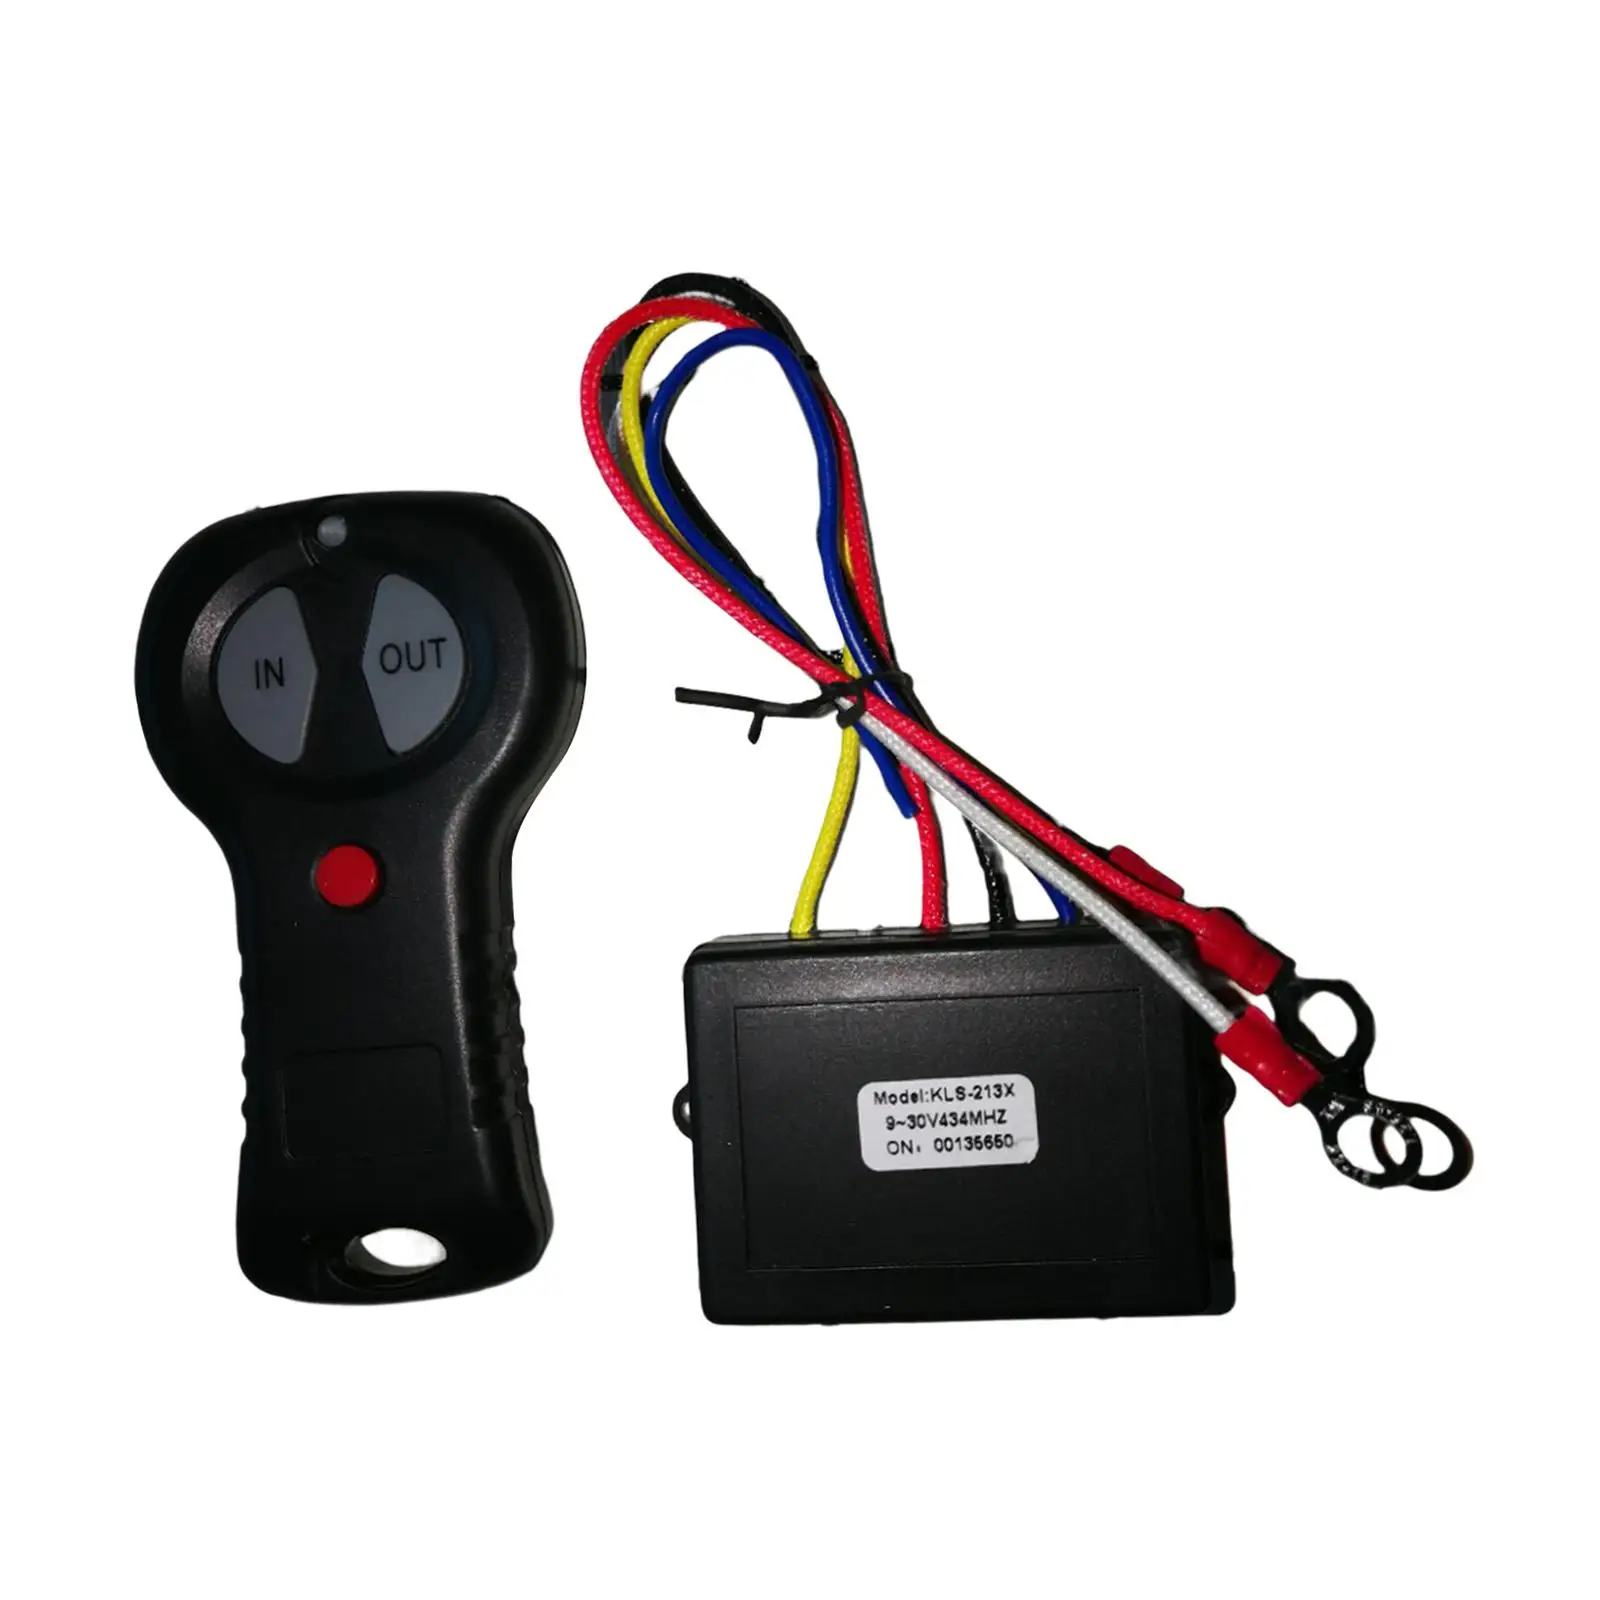 Winch Remote Control with Indicator Light Waterproof Easy Install Car Truck Winch Control Universal for ATV SUV car trucks